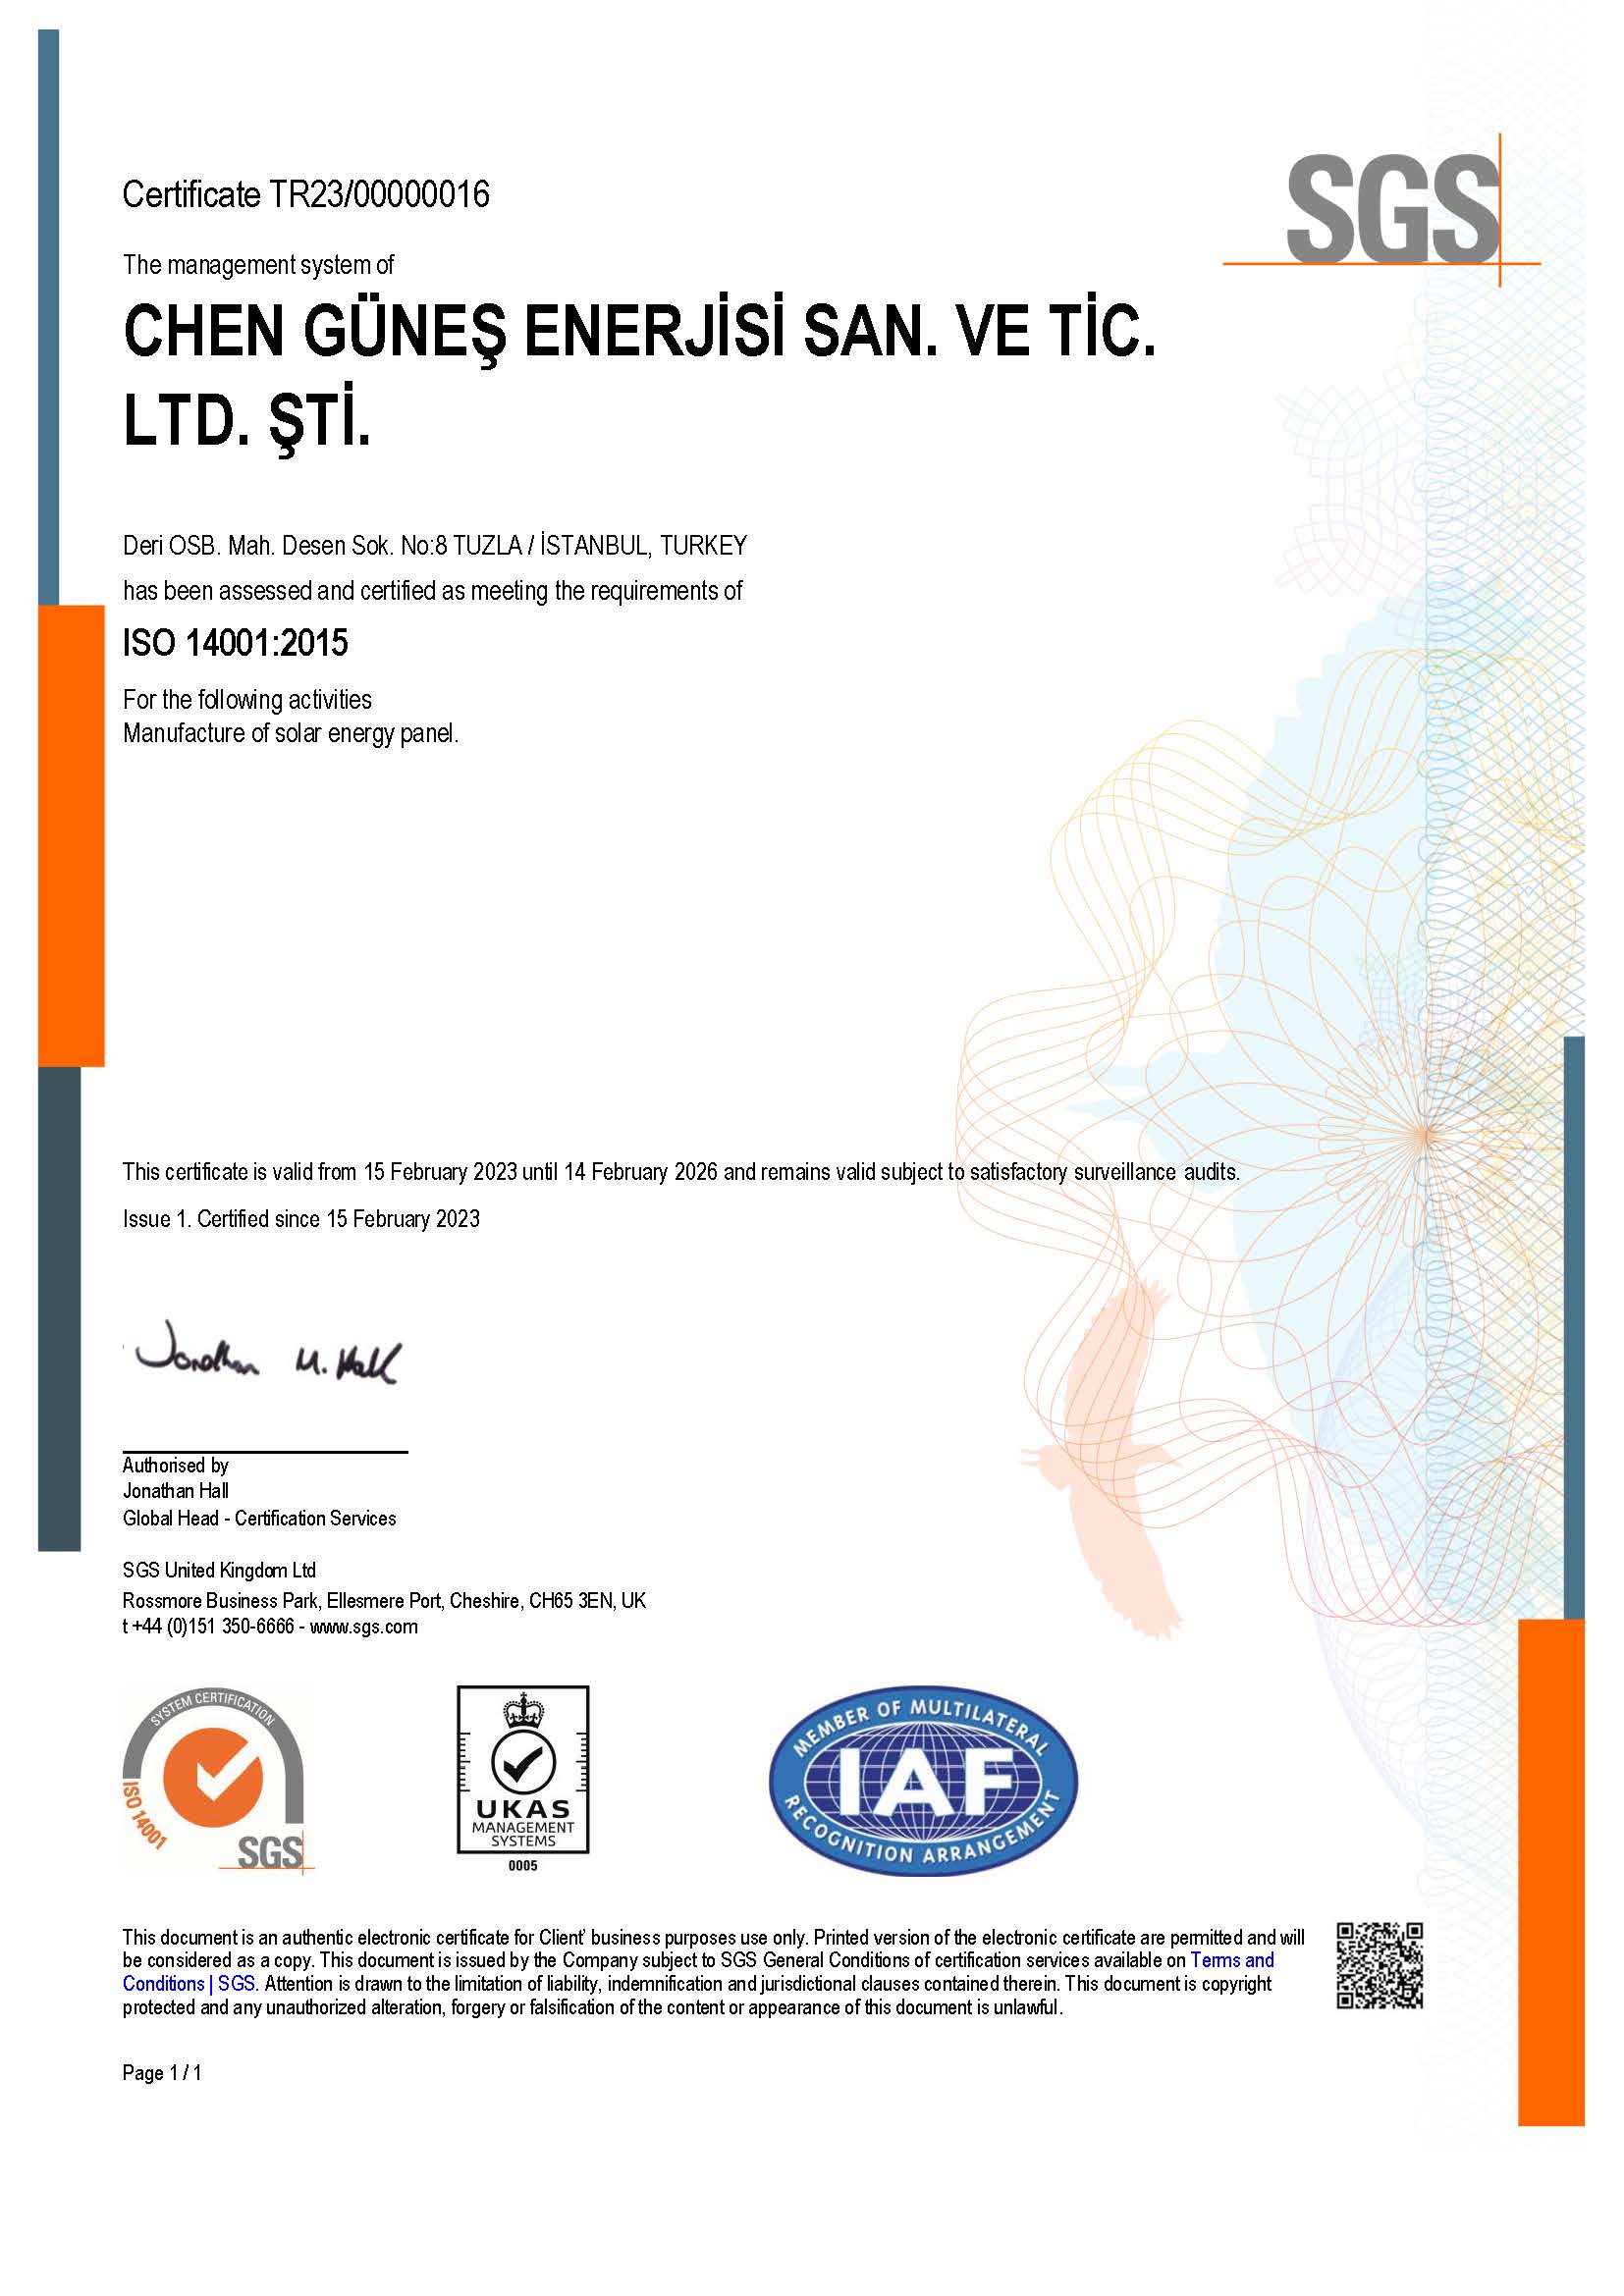 Certificate of Compliance - ISO 14001 2015 UKAS